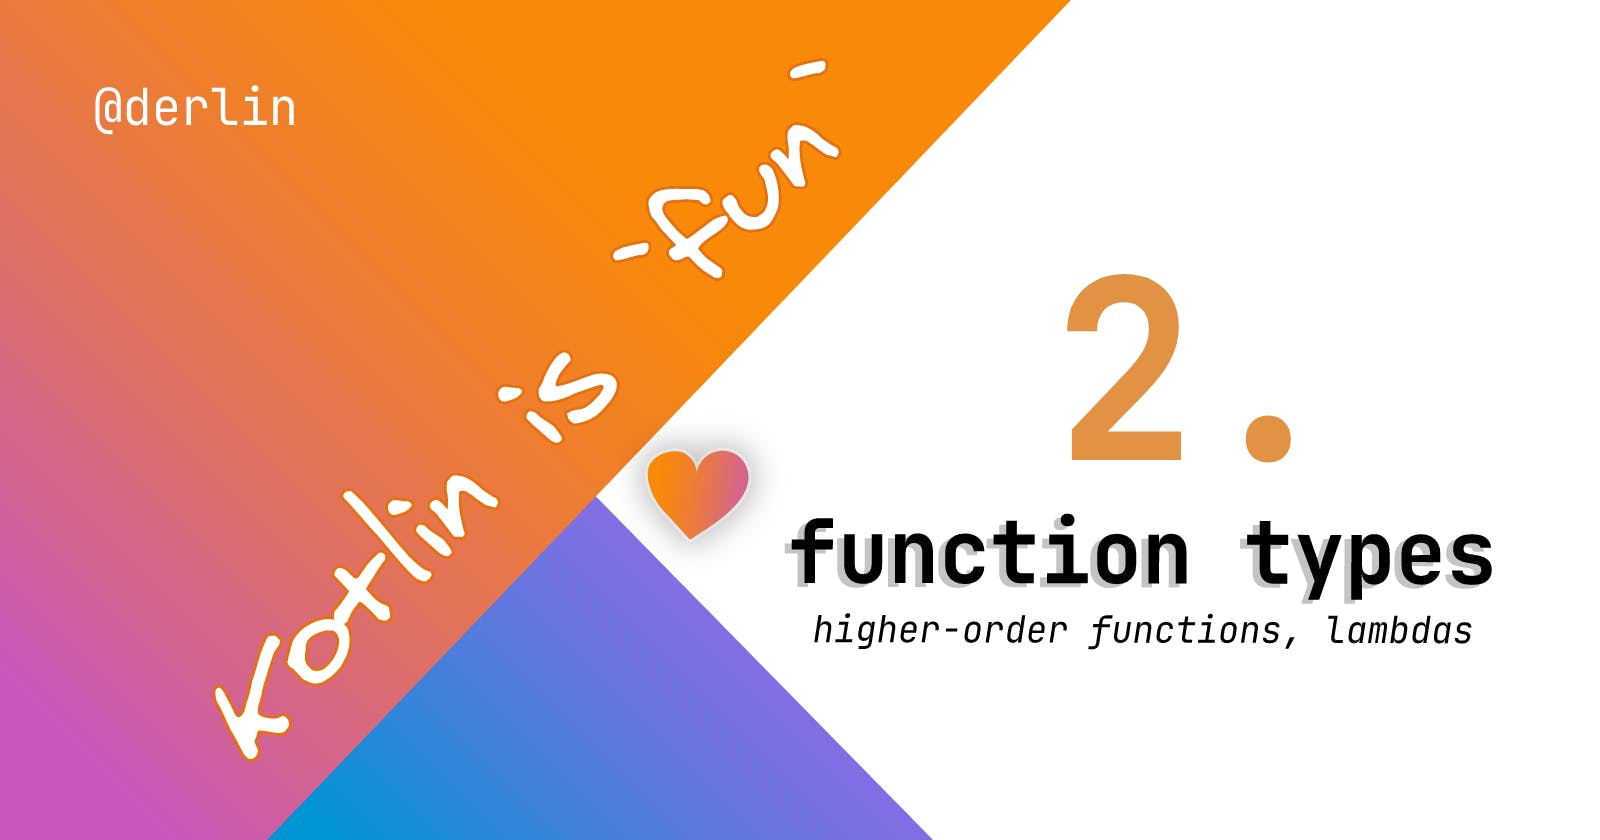 Kotlin is `fun` - Function types, lambdas, and higher-order functions